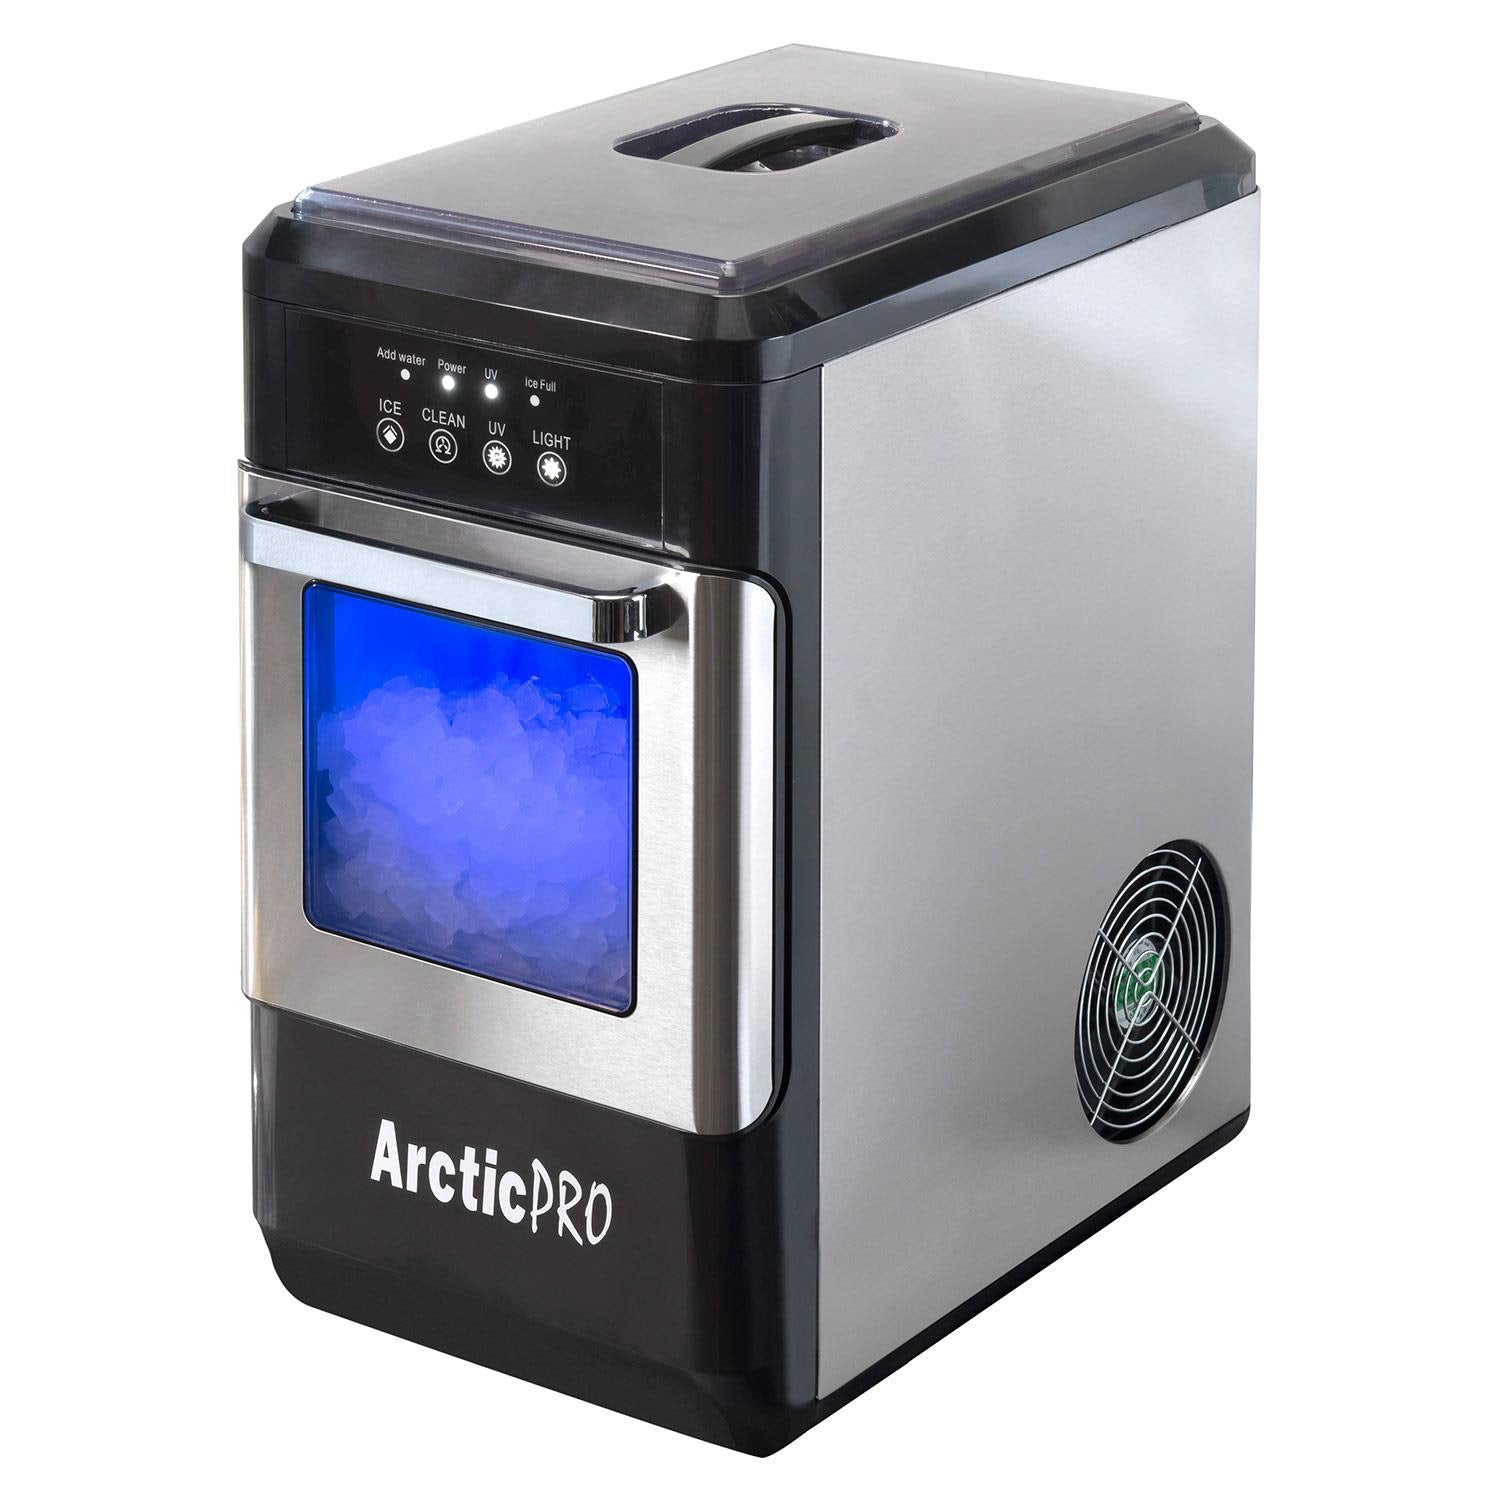 Arctic-Pro Ice Pellet Portable Ice Maker with UV Light and Ice Draw, Black-Stainless Steel